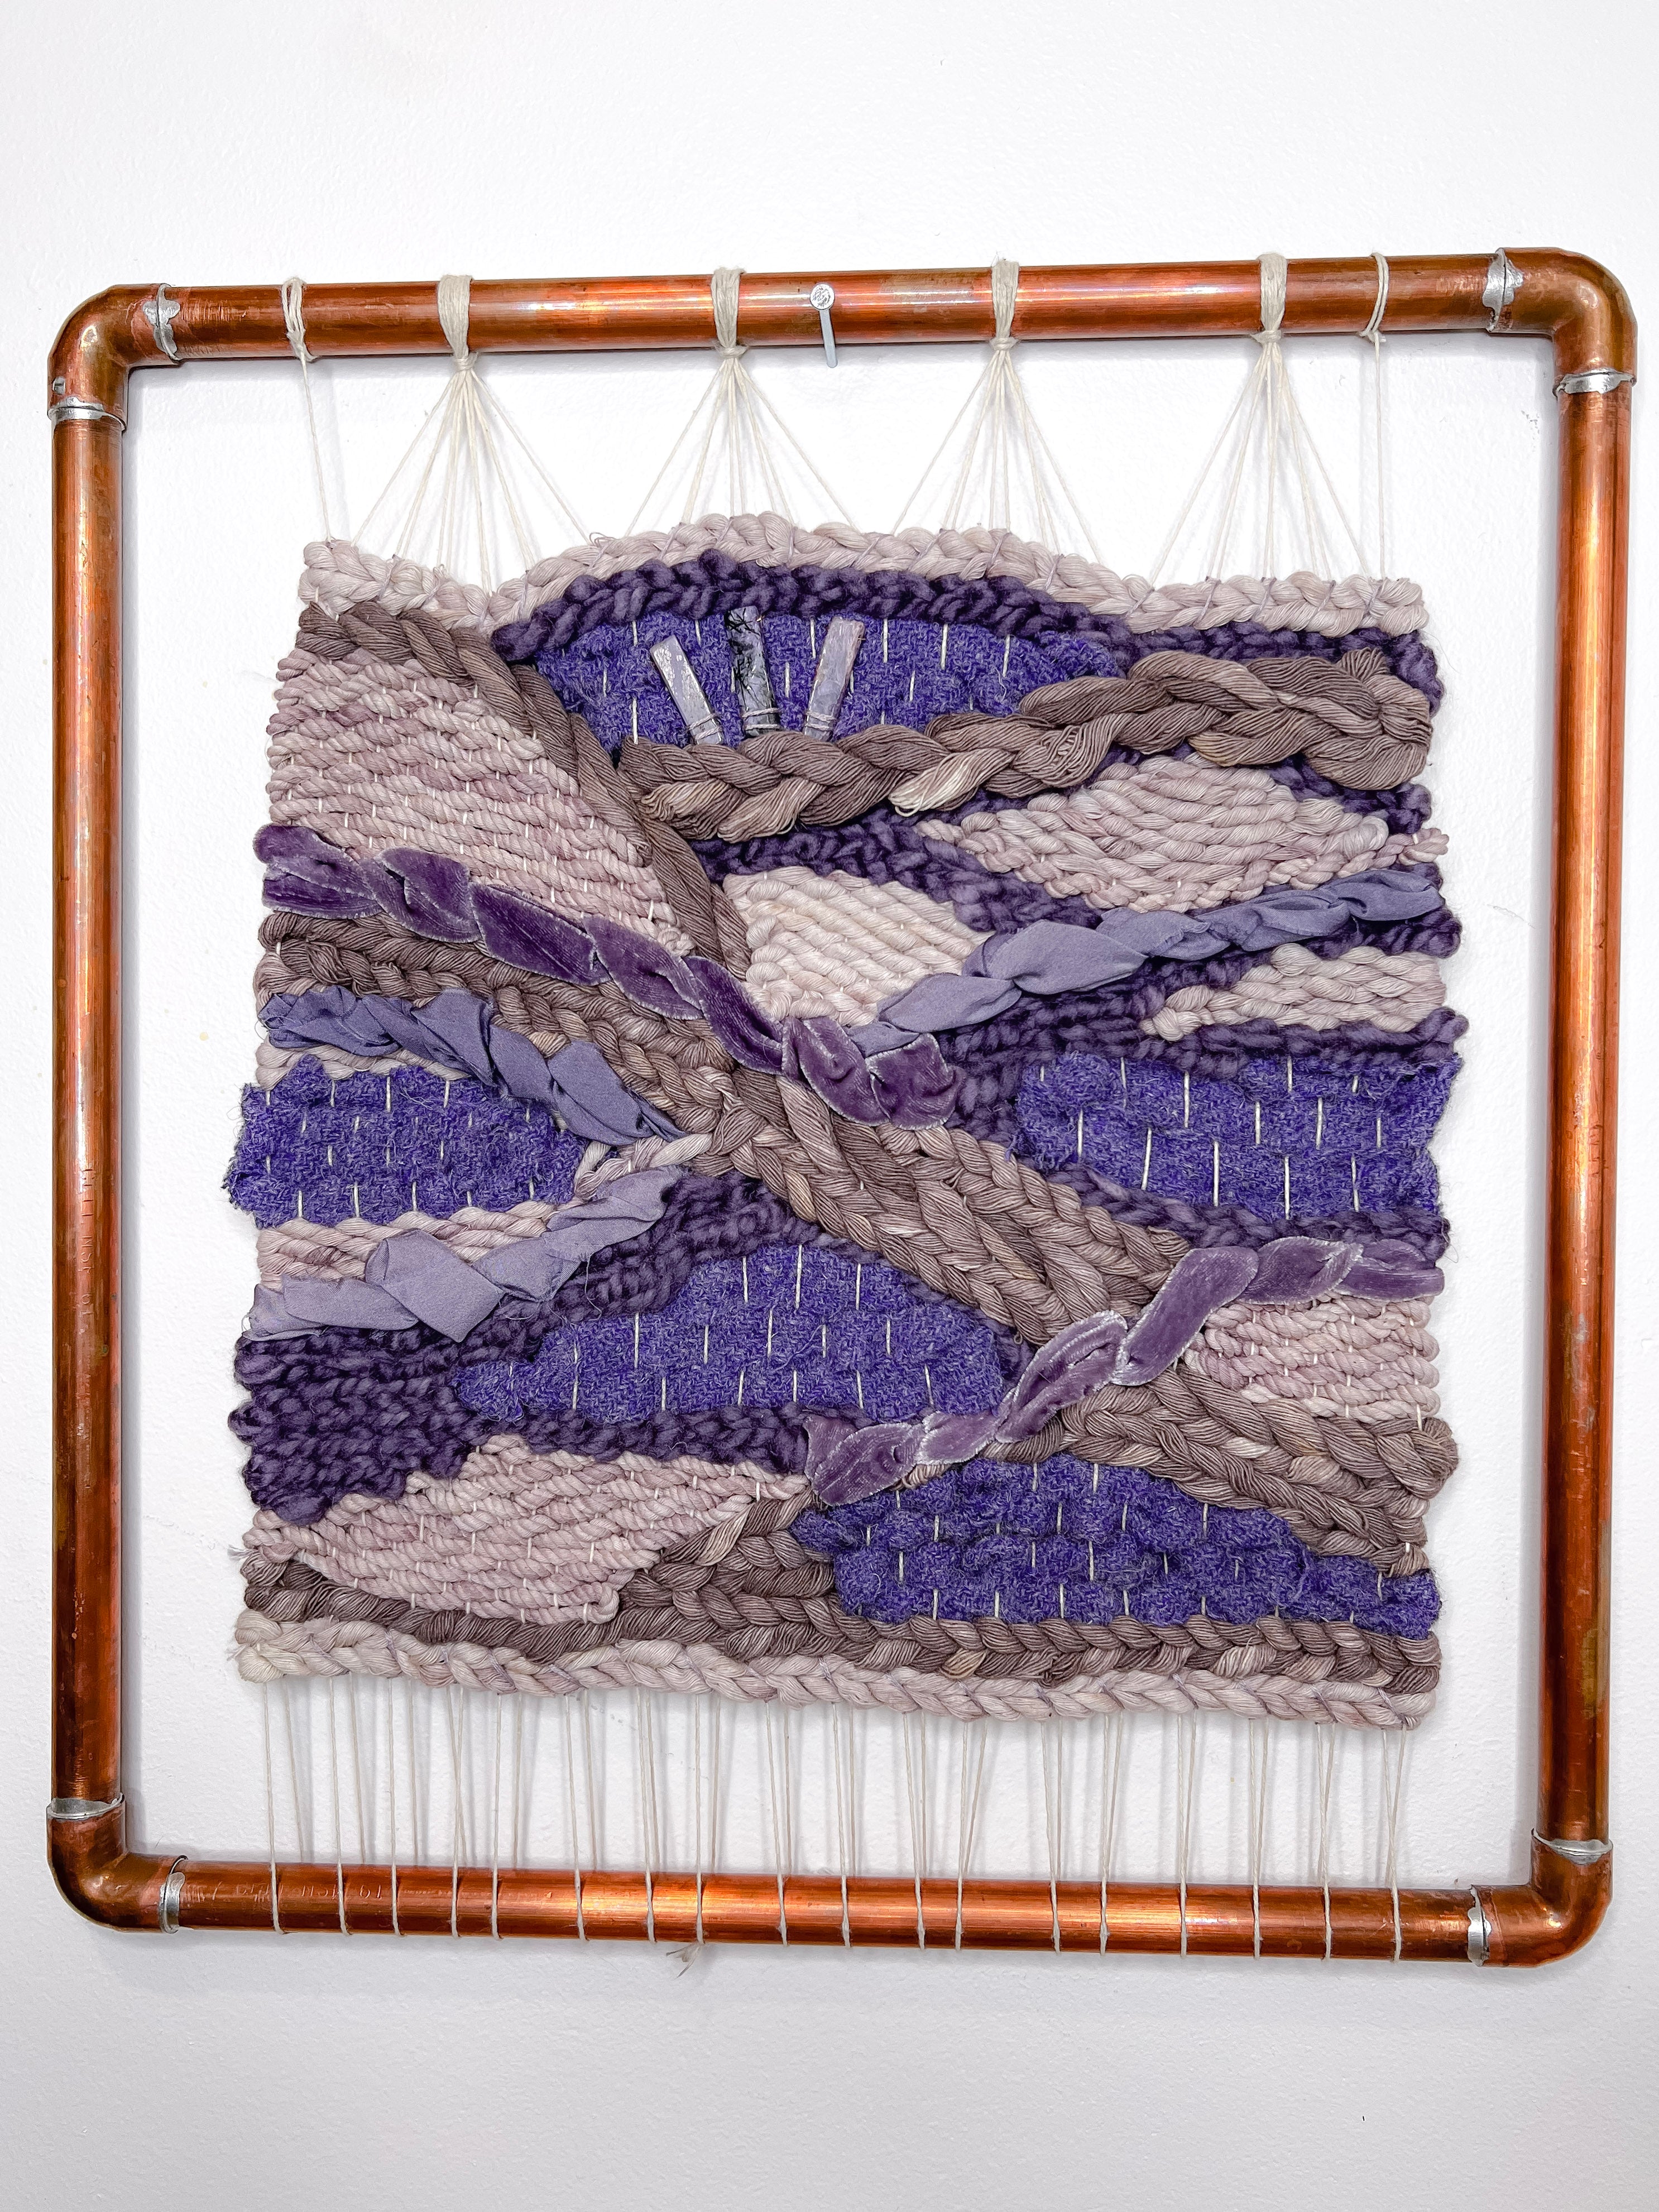 Naturally Dyed Woven Wall Hanging Tapestry Harris Tweed with Charoite Crystals Hand cut SIlk and Velvet Cotton Wool Ancient Purple Logwood Dye and Black Currant and Blueberries with Copper Frame 